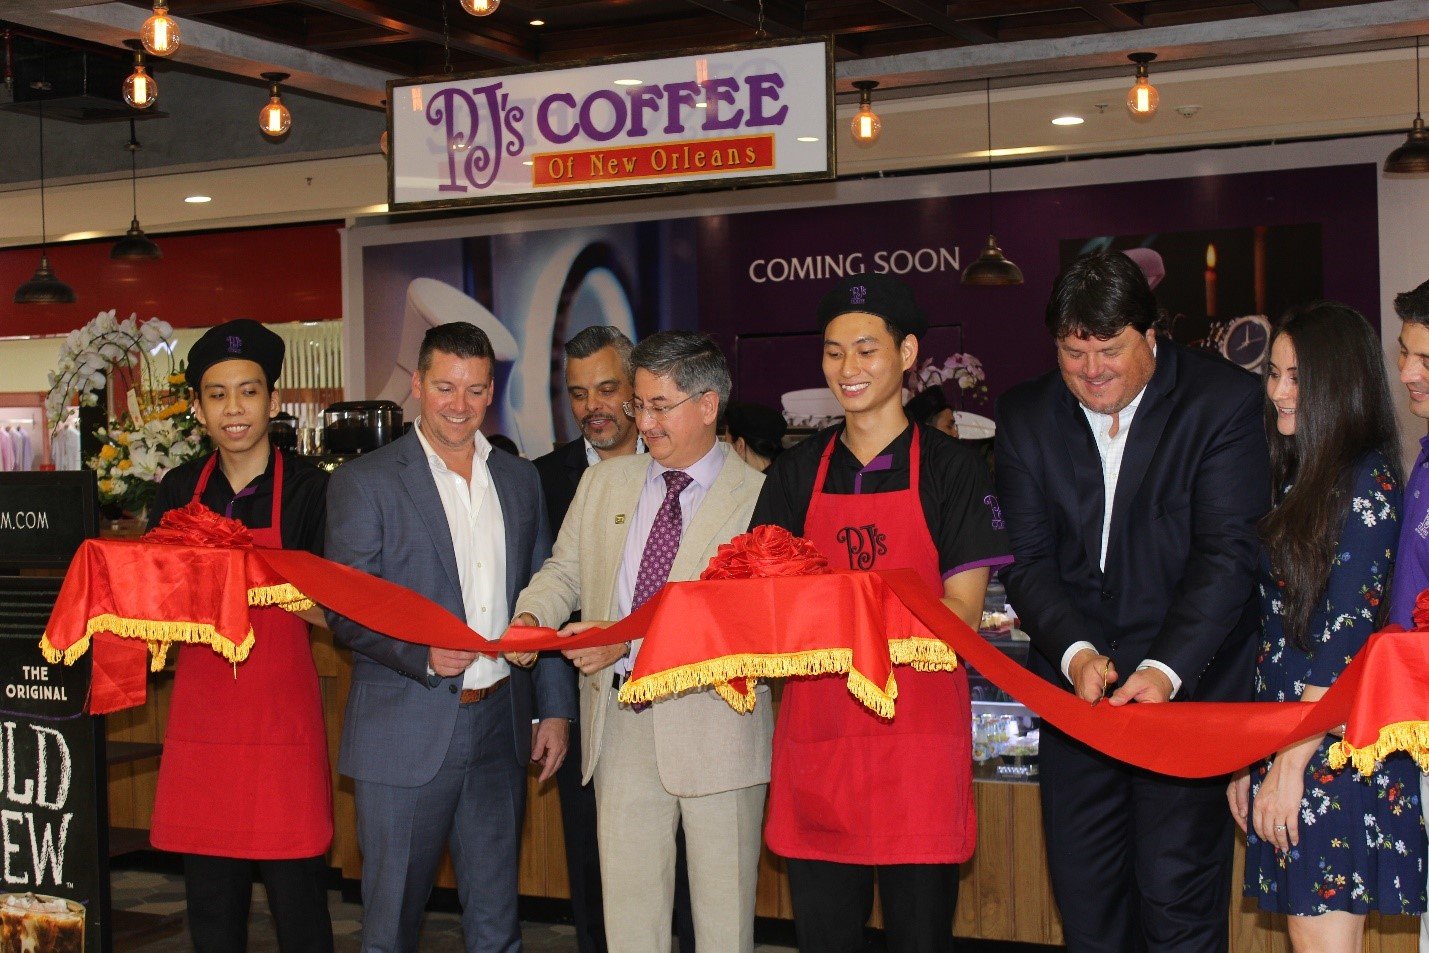 PJ’s Coffee Celebrates Grand Opening with Ribbon-Cutting Ceremony